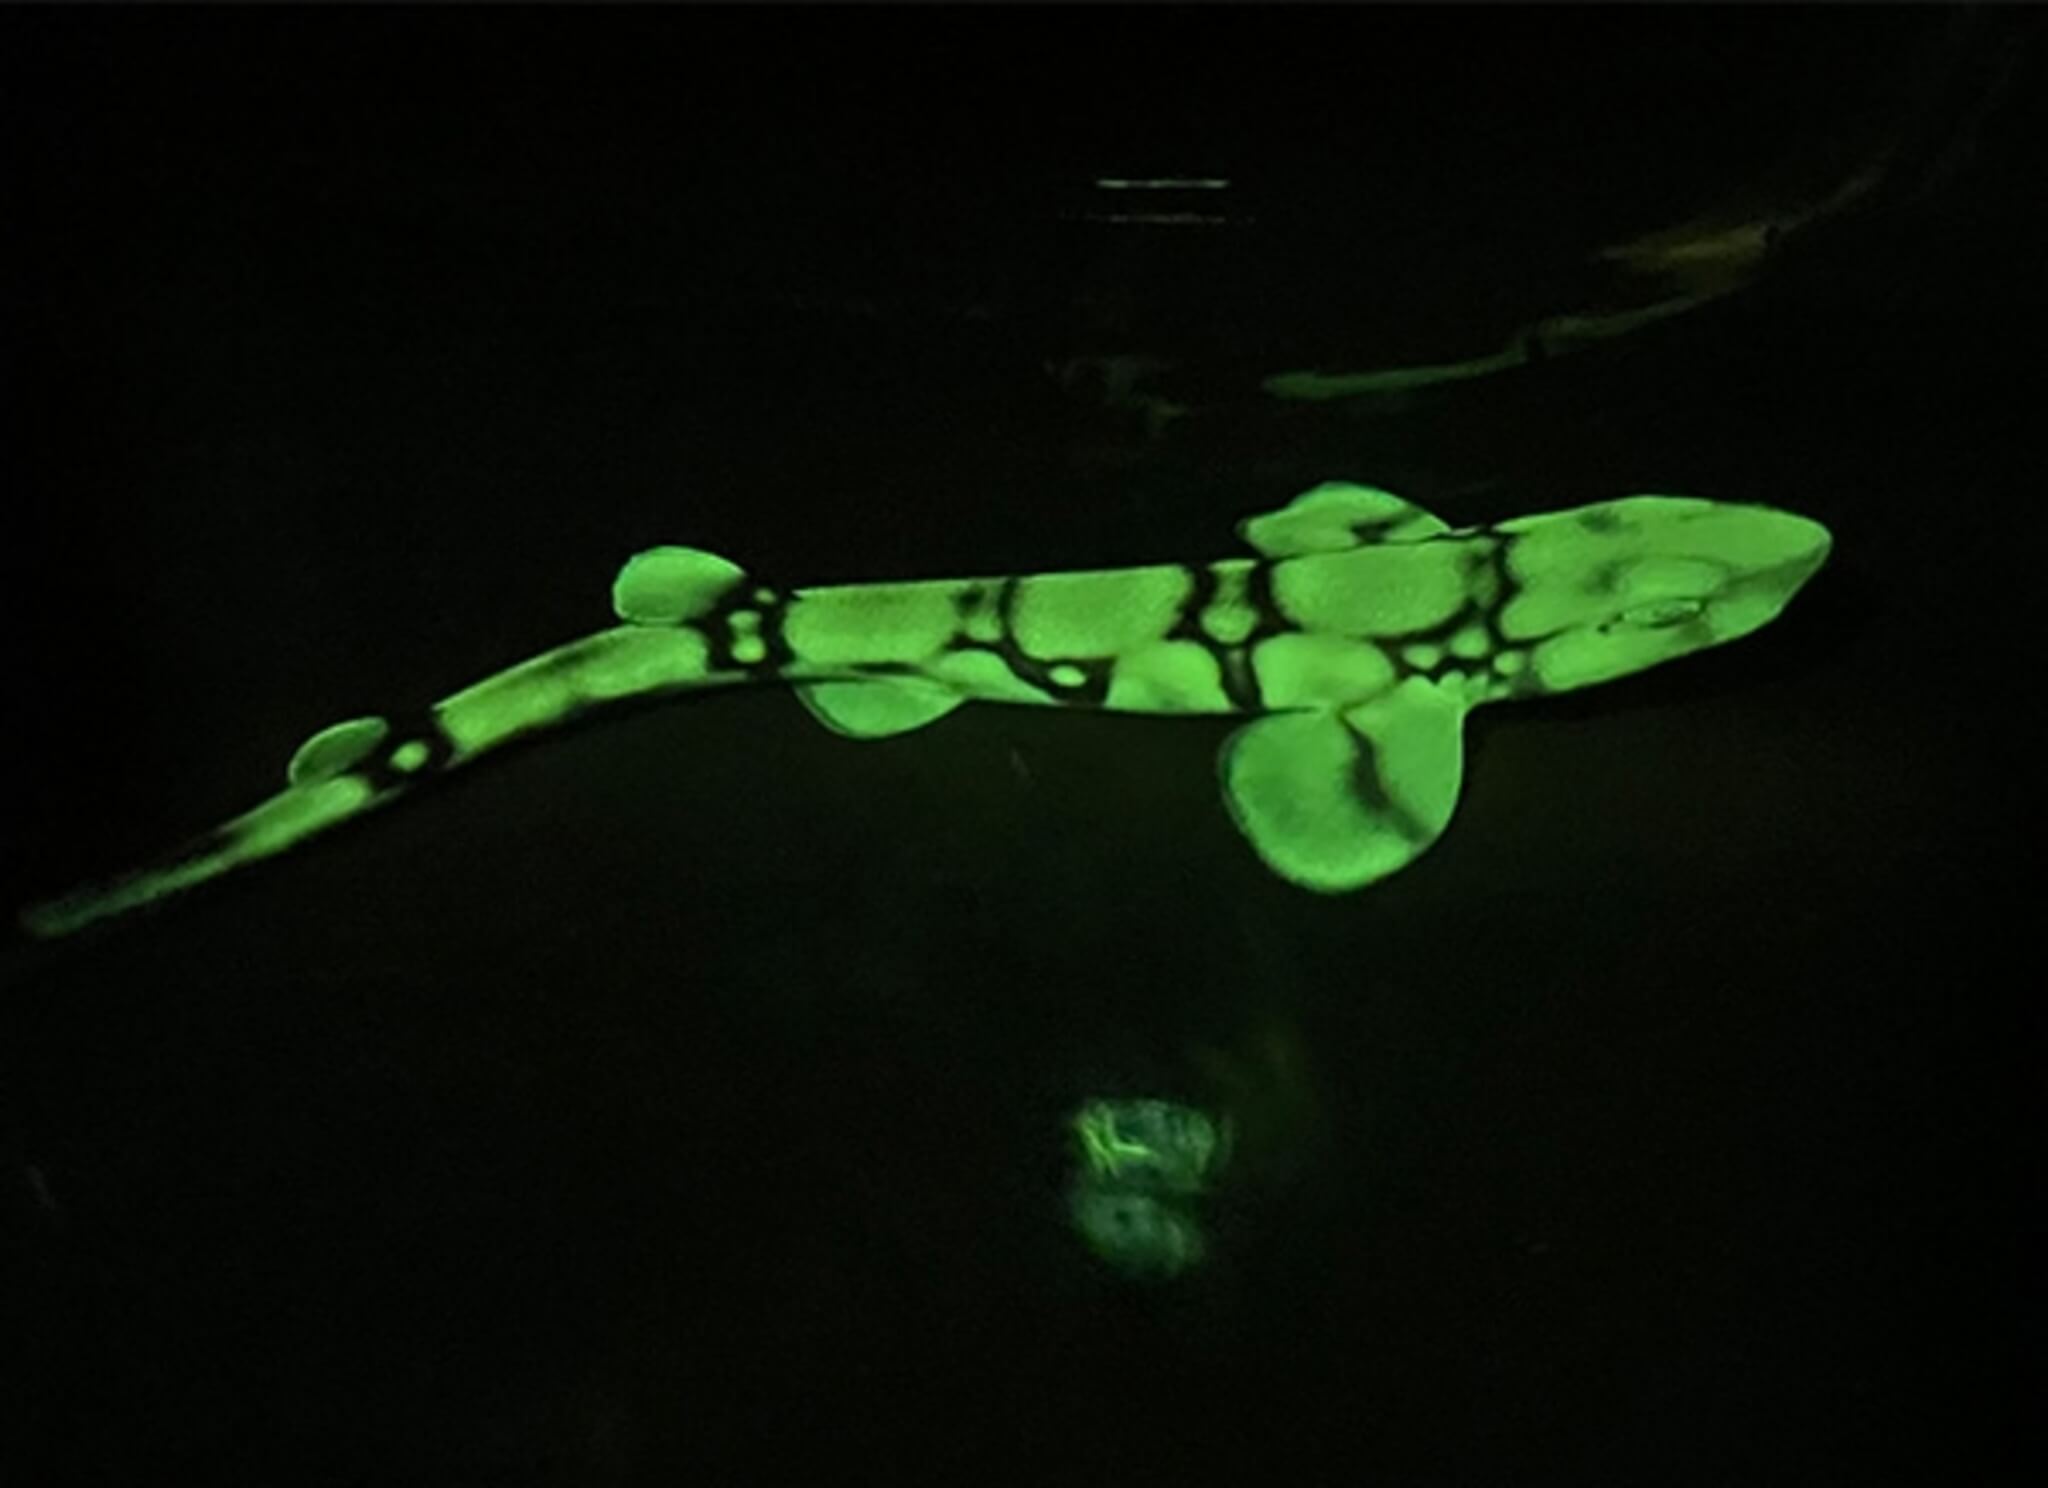 The chain catshark (Scyliorhinus retifer) is one of four elasmobranch species (sharks, skates, rays and sawfish) known to be biofluorescent